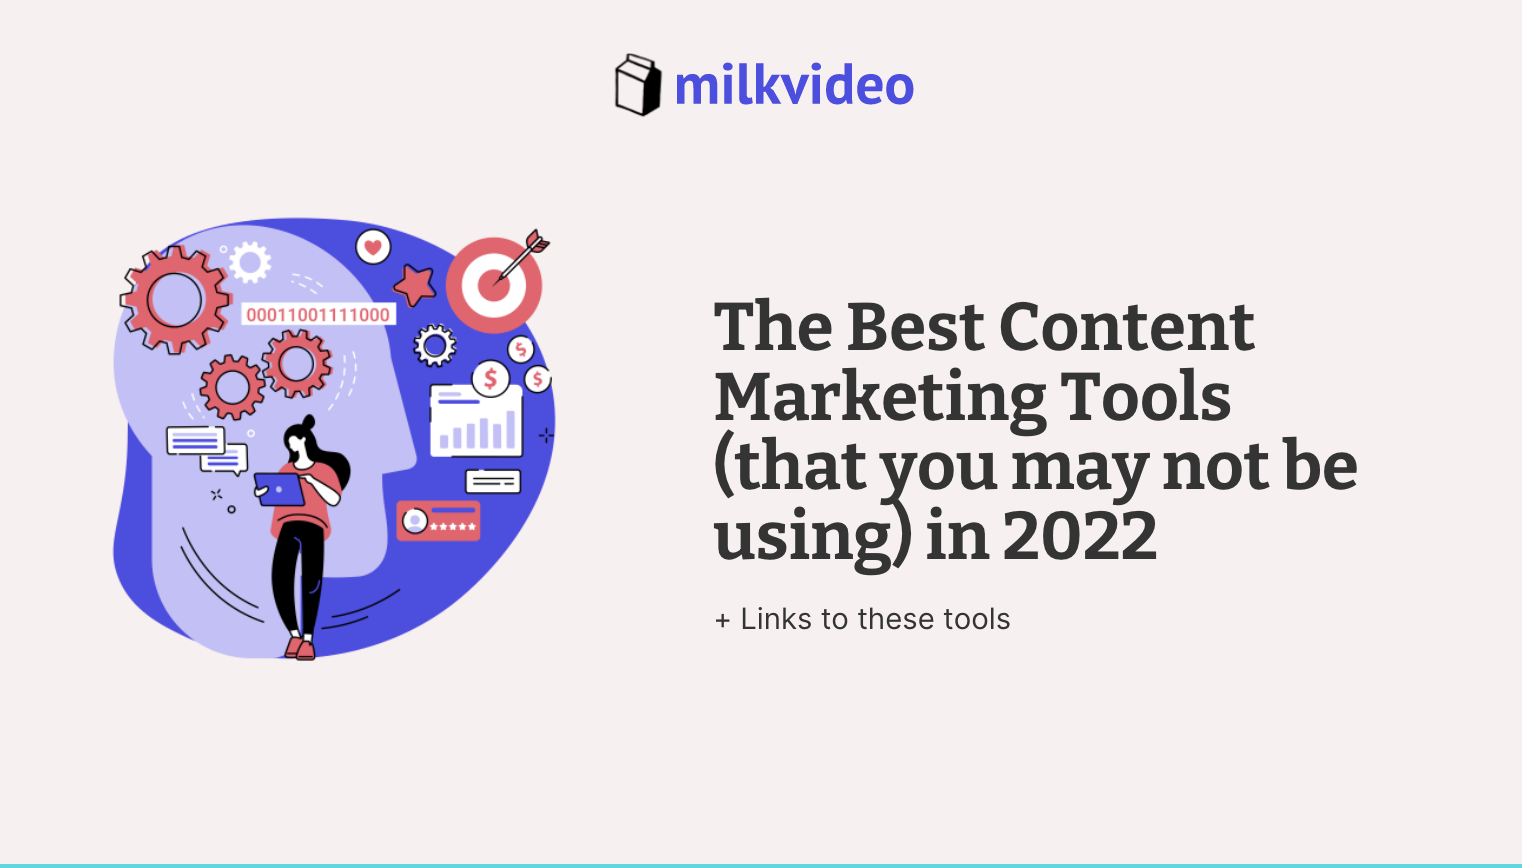 The Best Content Marketing Tools (that you may not be using) in 2022